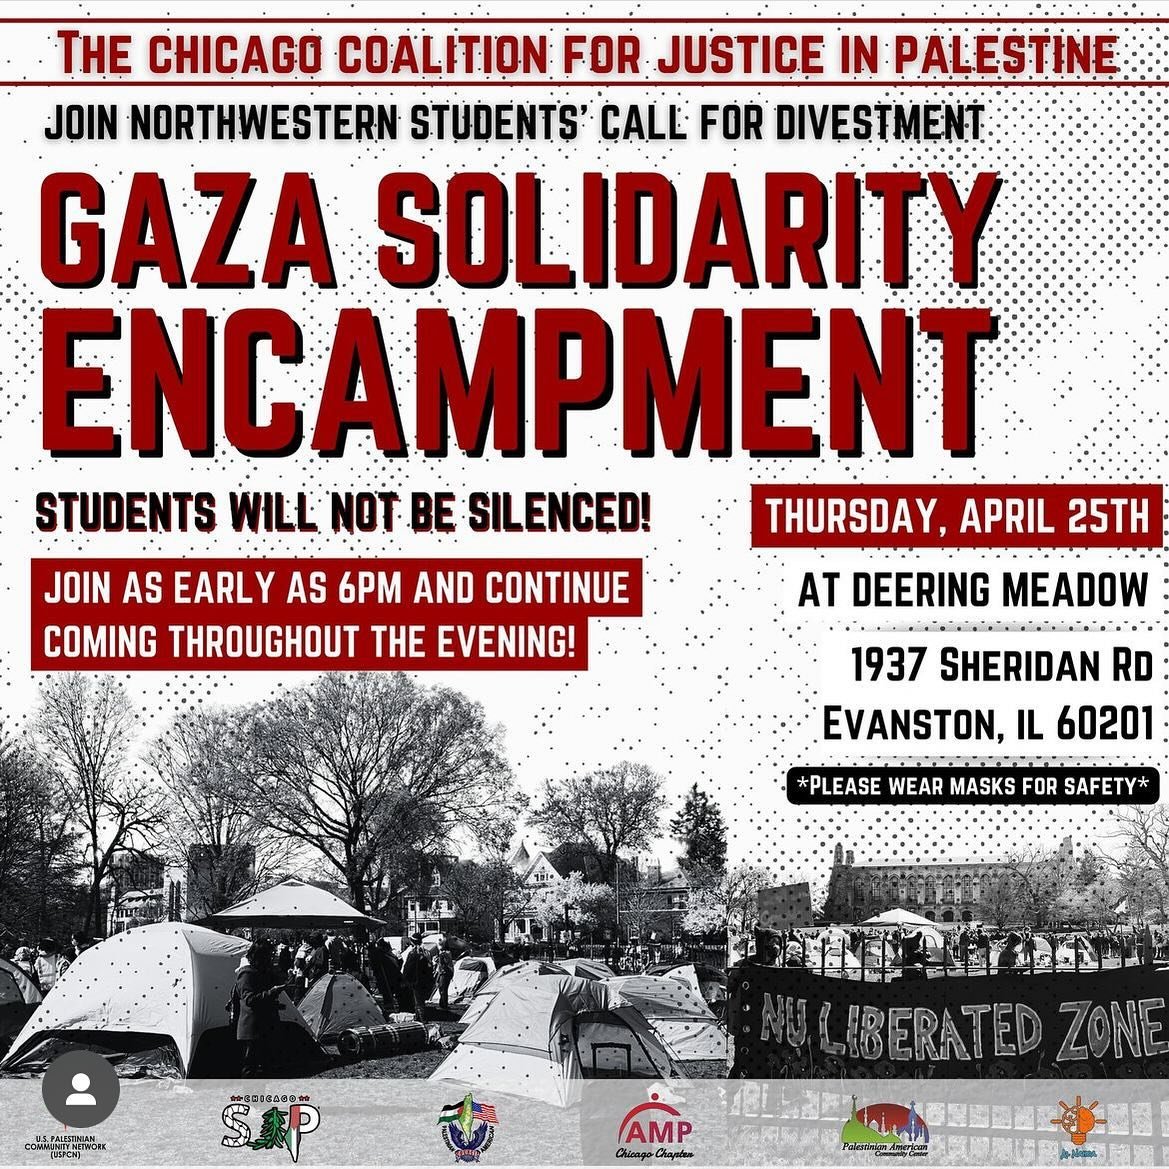 Repost! @uspcn 🚨 CALLING ALL CHICAGO‼️ JOIN US IN SUPPORTING NORTHWESTERN&rsquo;S GAZA SOLIDARITY ENCAMPMENT TONIGHT STARTING AT 6 PM &amp; CONTINUING THROUGHOUT THE EVENING 🚨

This morning, Northwestern set up their Gaza Solidarity Encampment and 